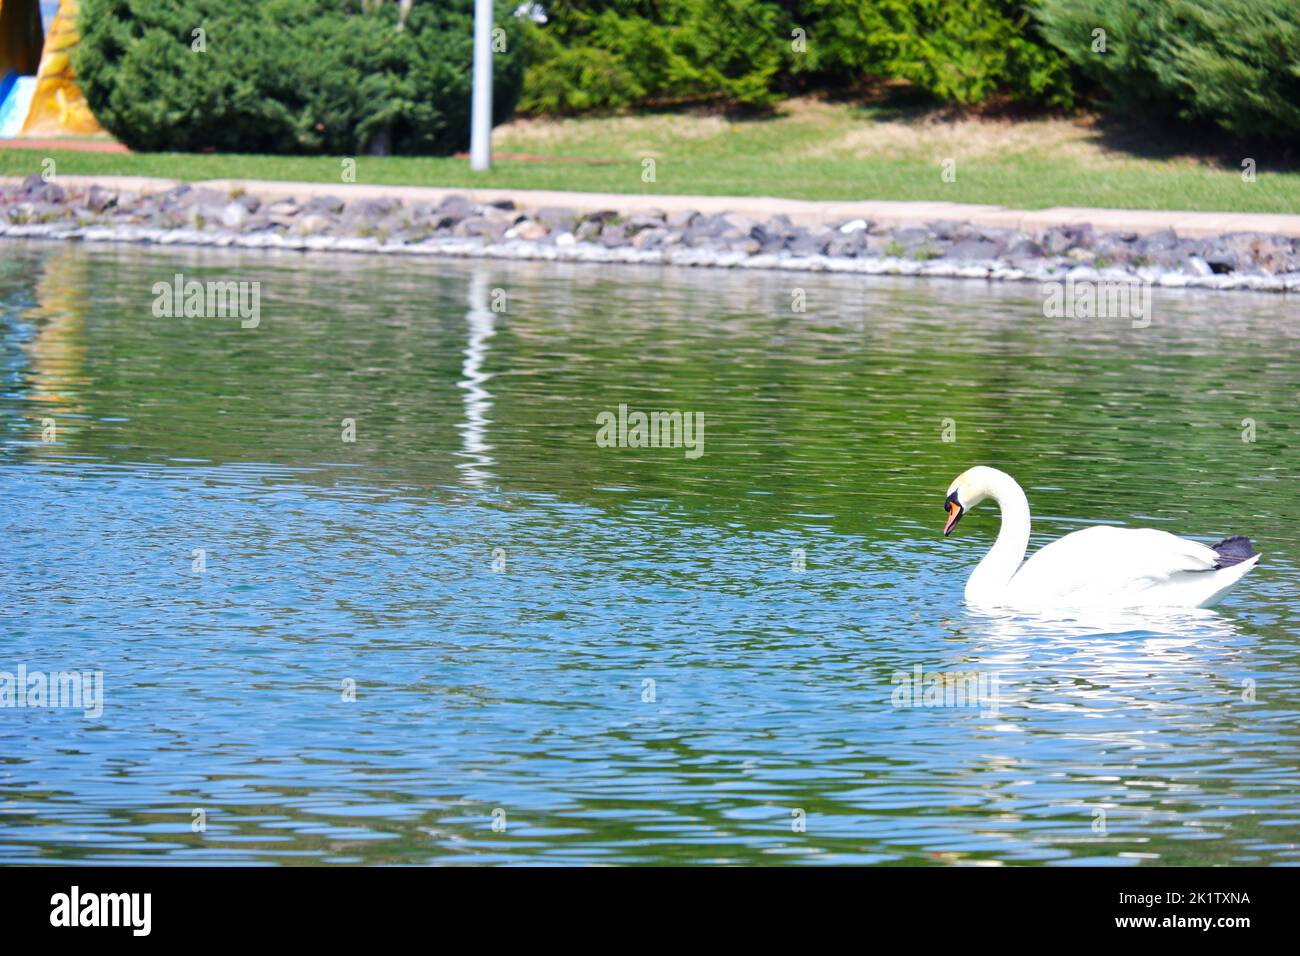 White Svan swimming at lake in park in a sunny day Stock Photo